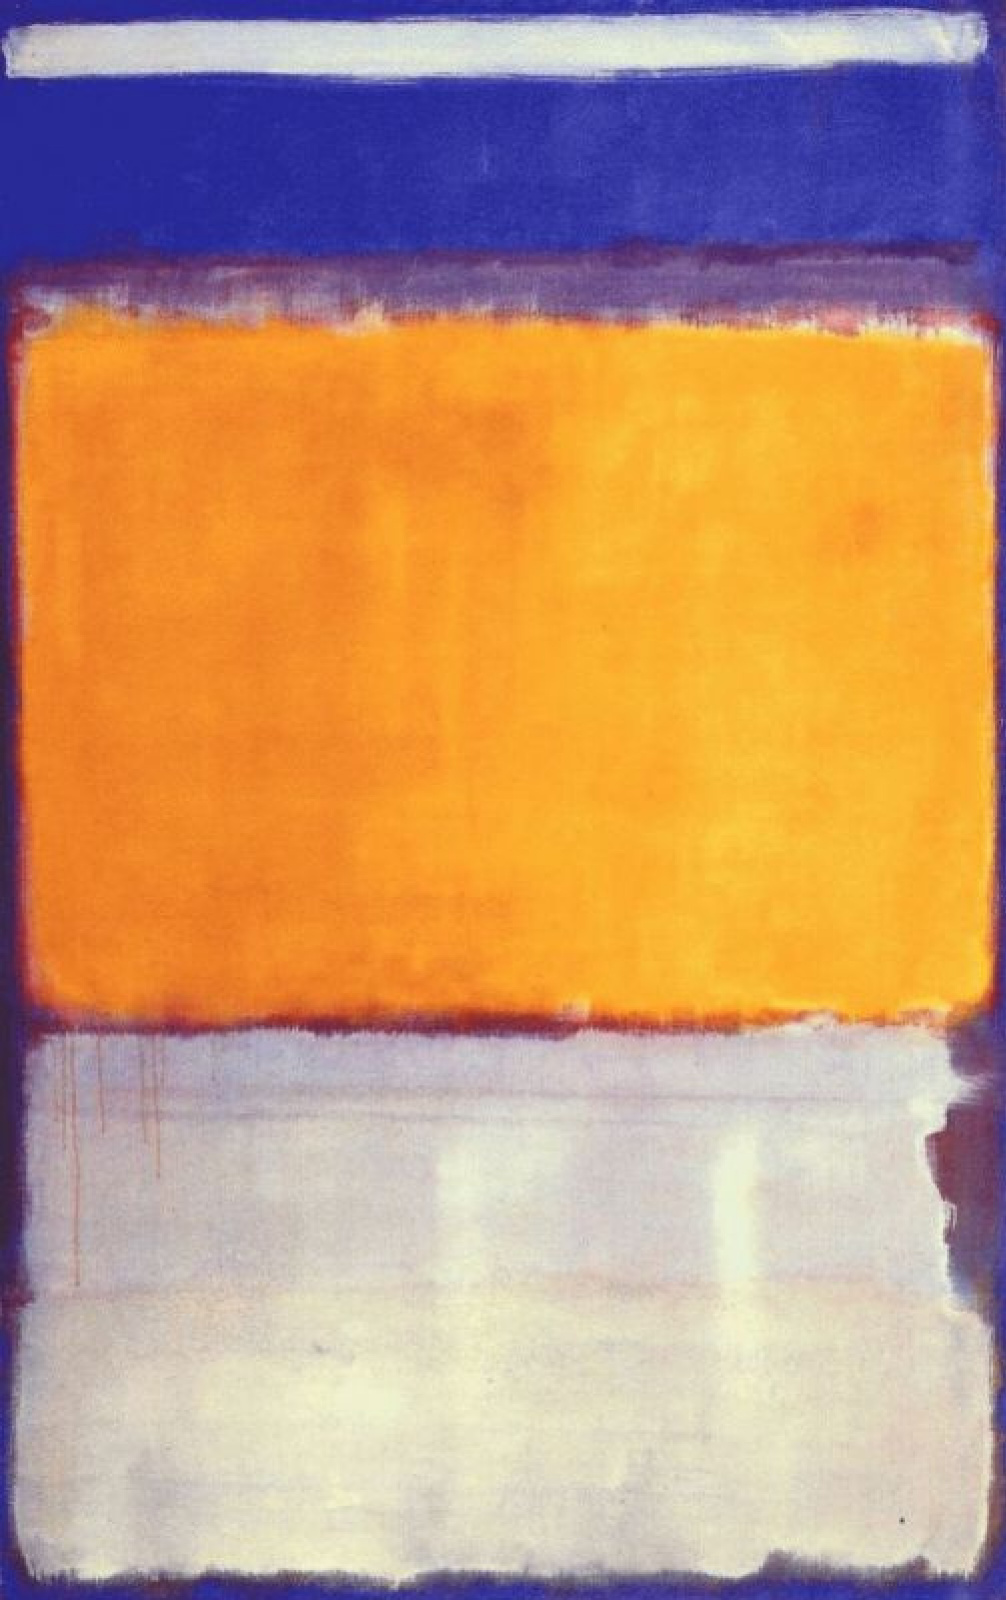 What would Mark Rothko make of the world today? His son discusses